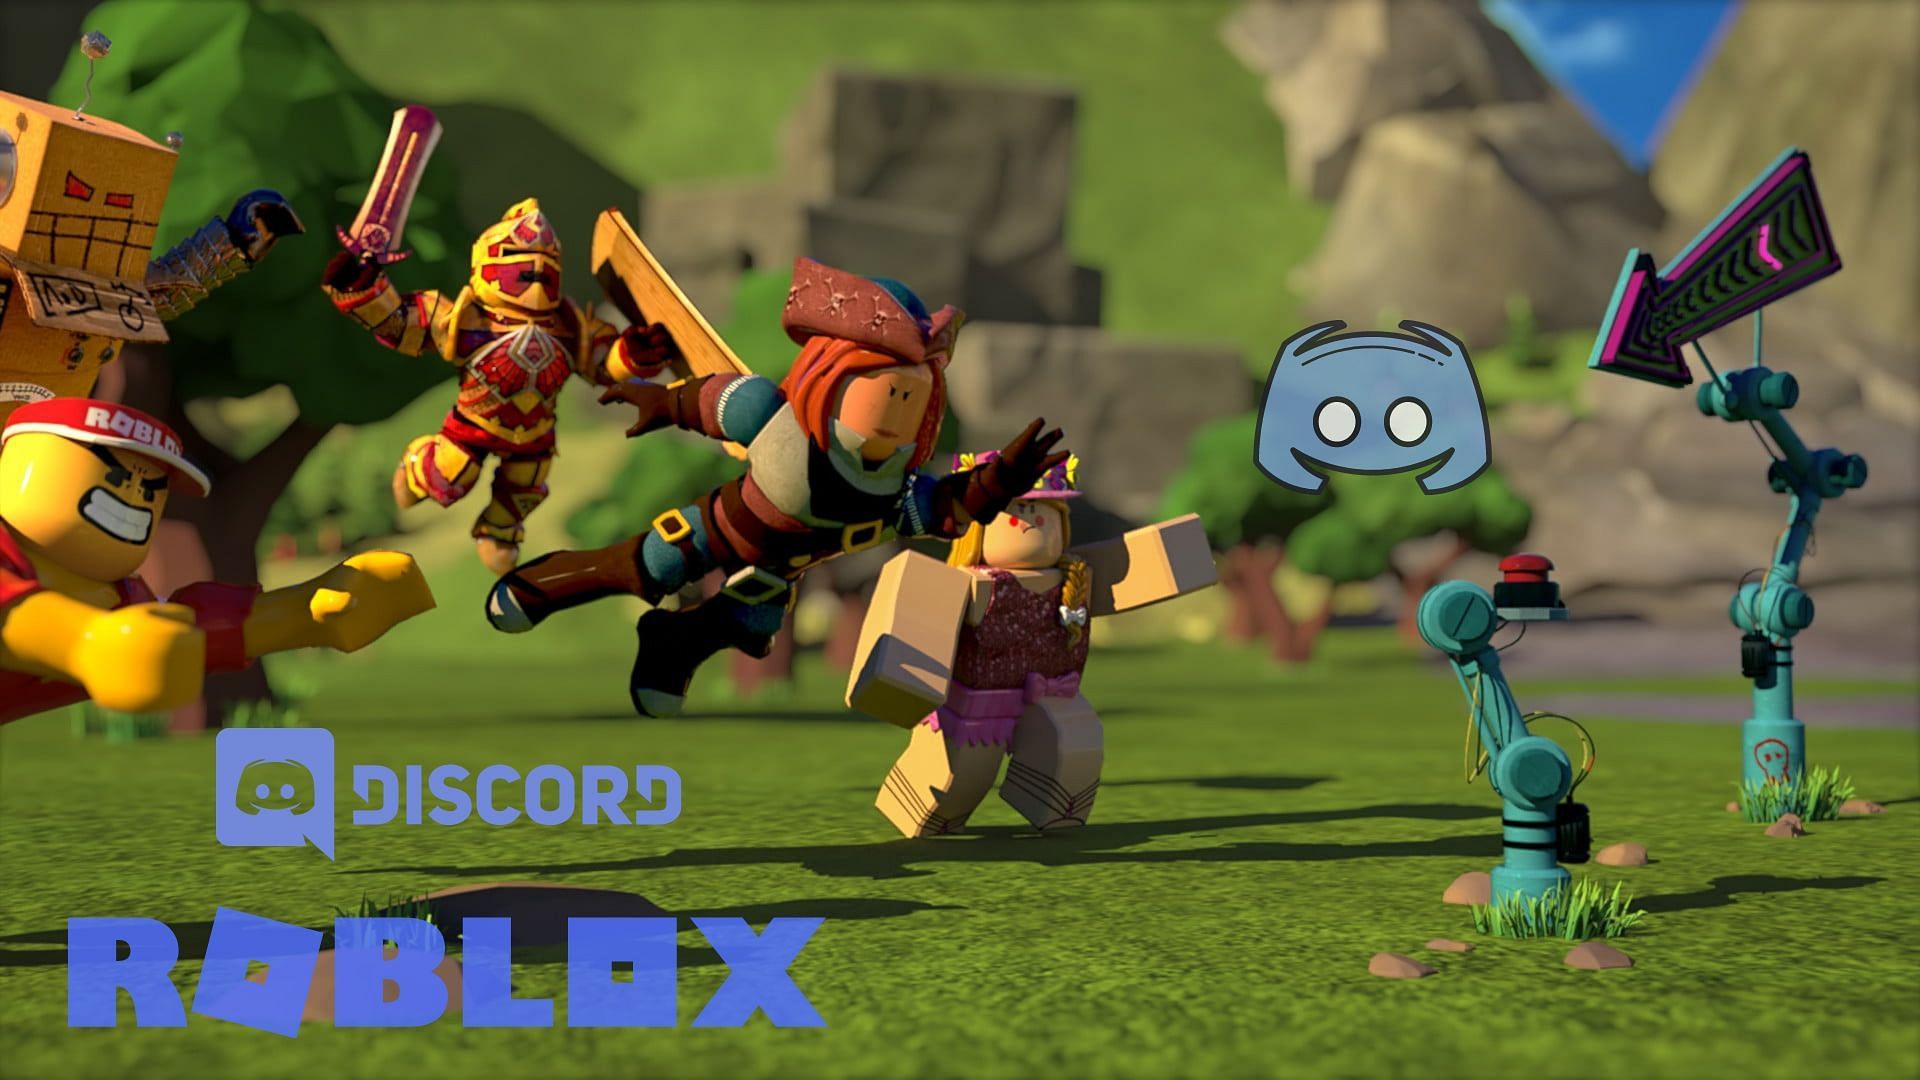 Top Discord servers to join (Image via Roblox and Discord Inc.)